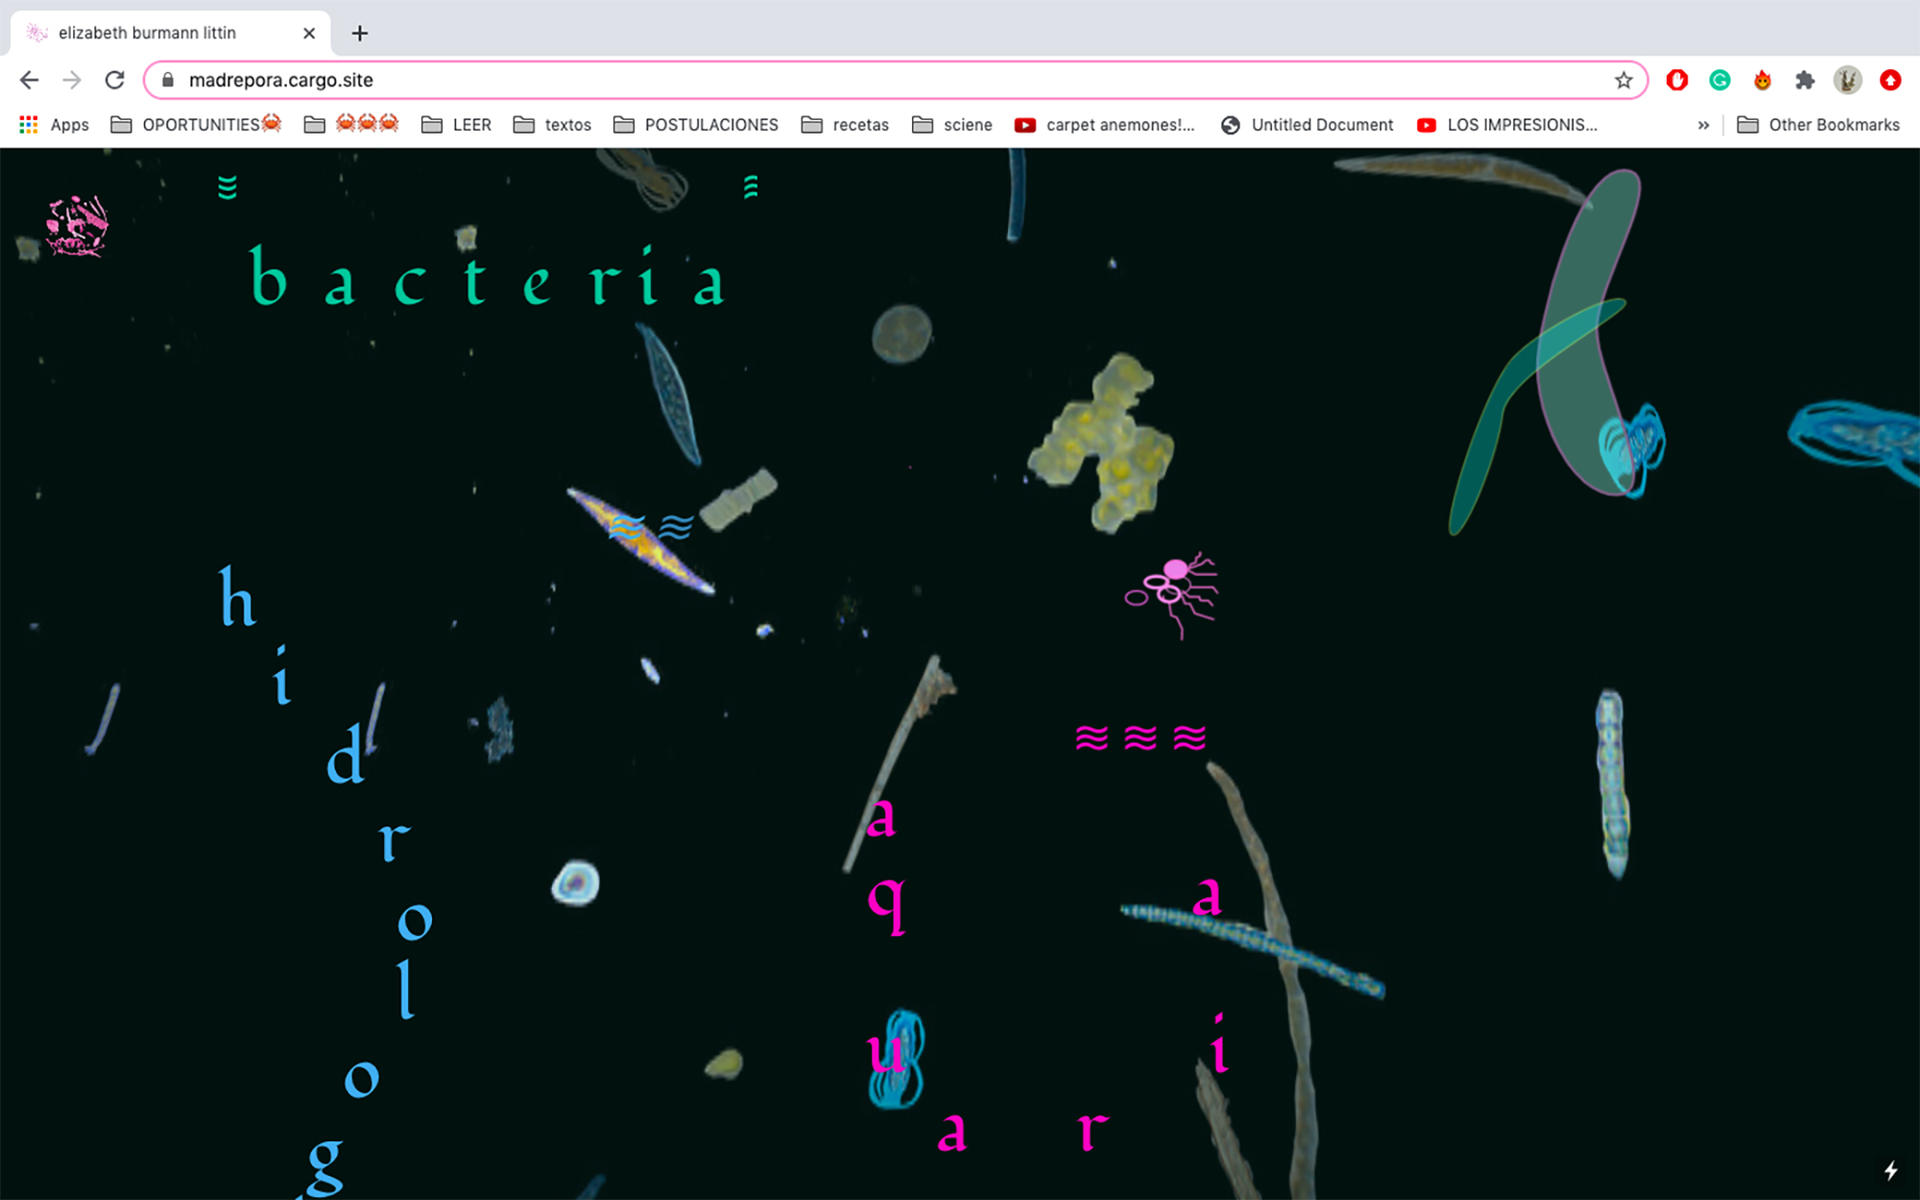 screenshot of a web browser, at a site with a black background and floating colorful shapes. The word "bacteria" is visible